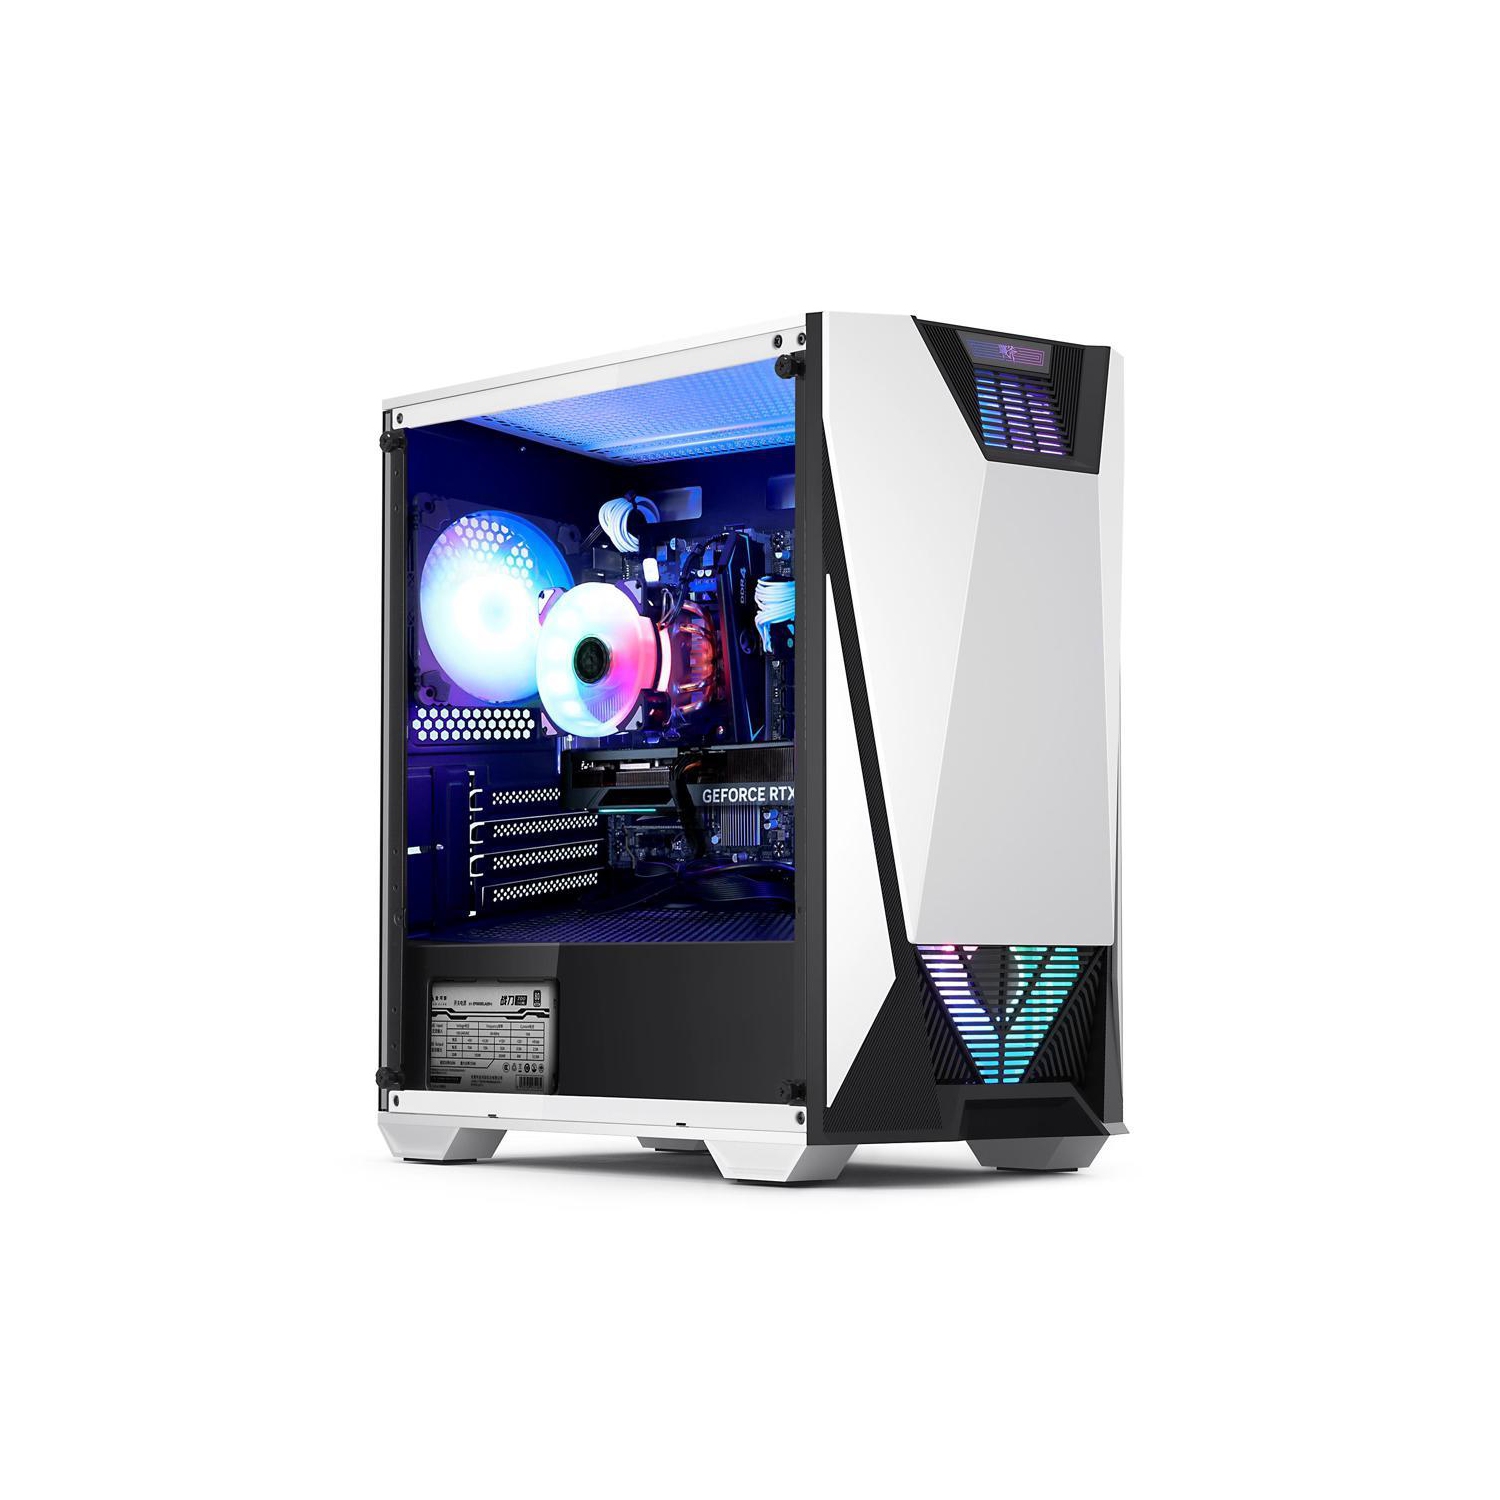 Hoengager Battleaxe Gaming - Intel Core i5-12400F 6-Core 2.5 GHz-NVIDIA GeForce RTX 3060 Ti- 32GB DDR4 3200MHz - 1TB+500GB M.2 NVMe SSD- WIFI -RGB Fans - Windows 11 Pro Computer